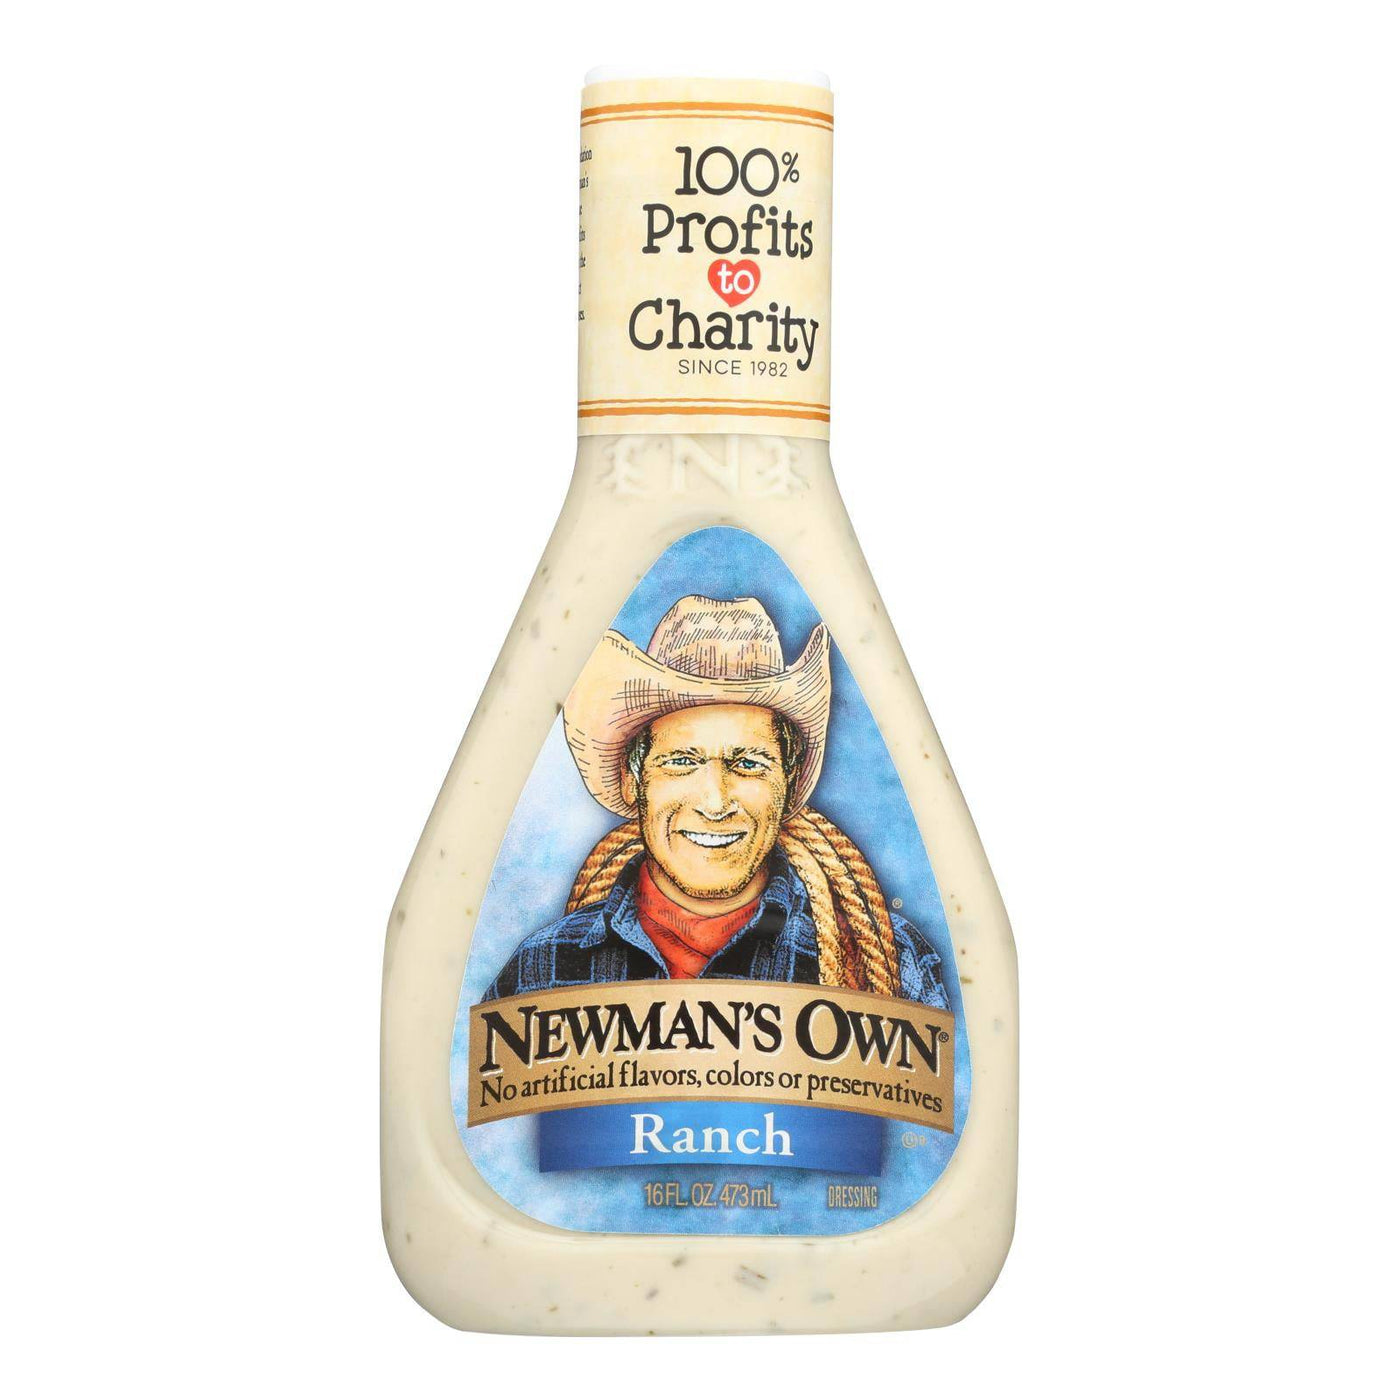 Buy Newman's Own Salad Dressing - Ranch - Case Of 6 - 16 Fl Oz.  at OnlyNaturals.us